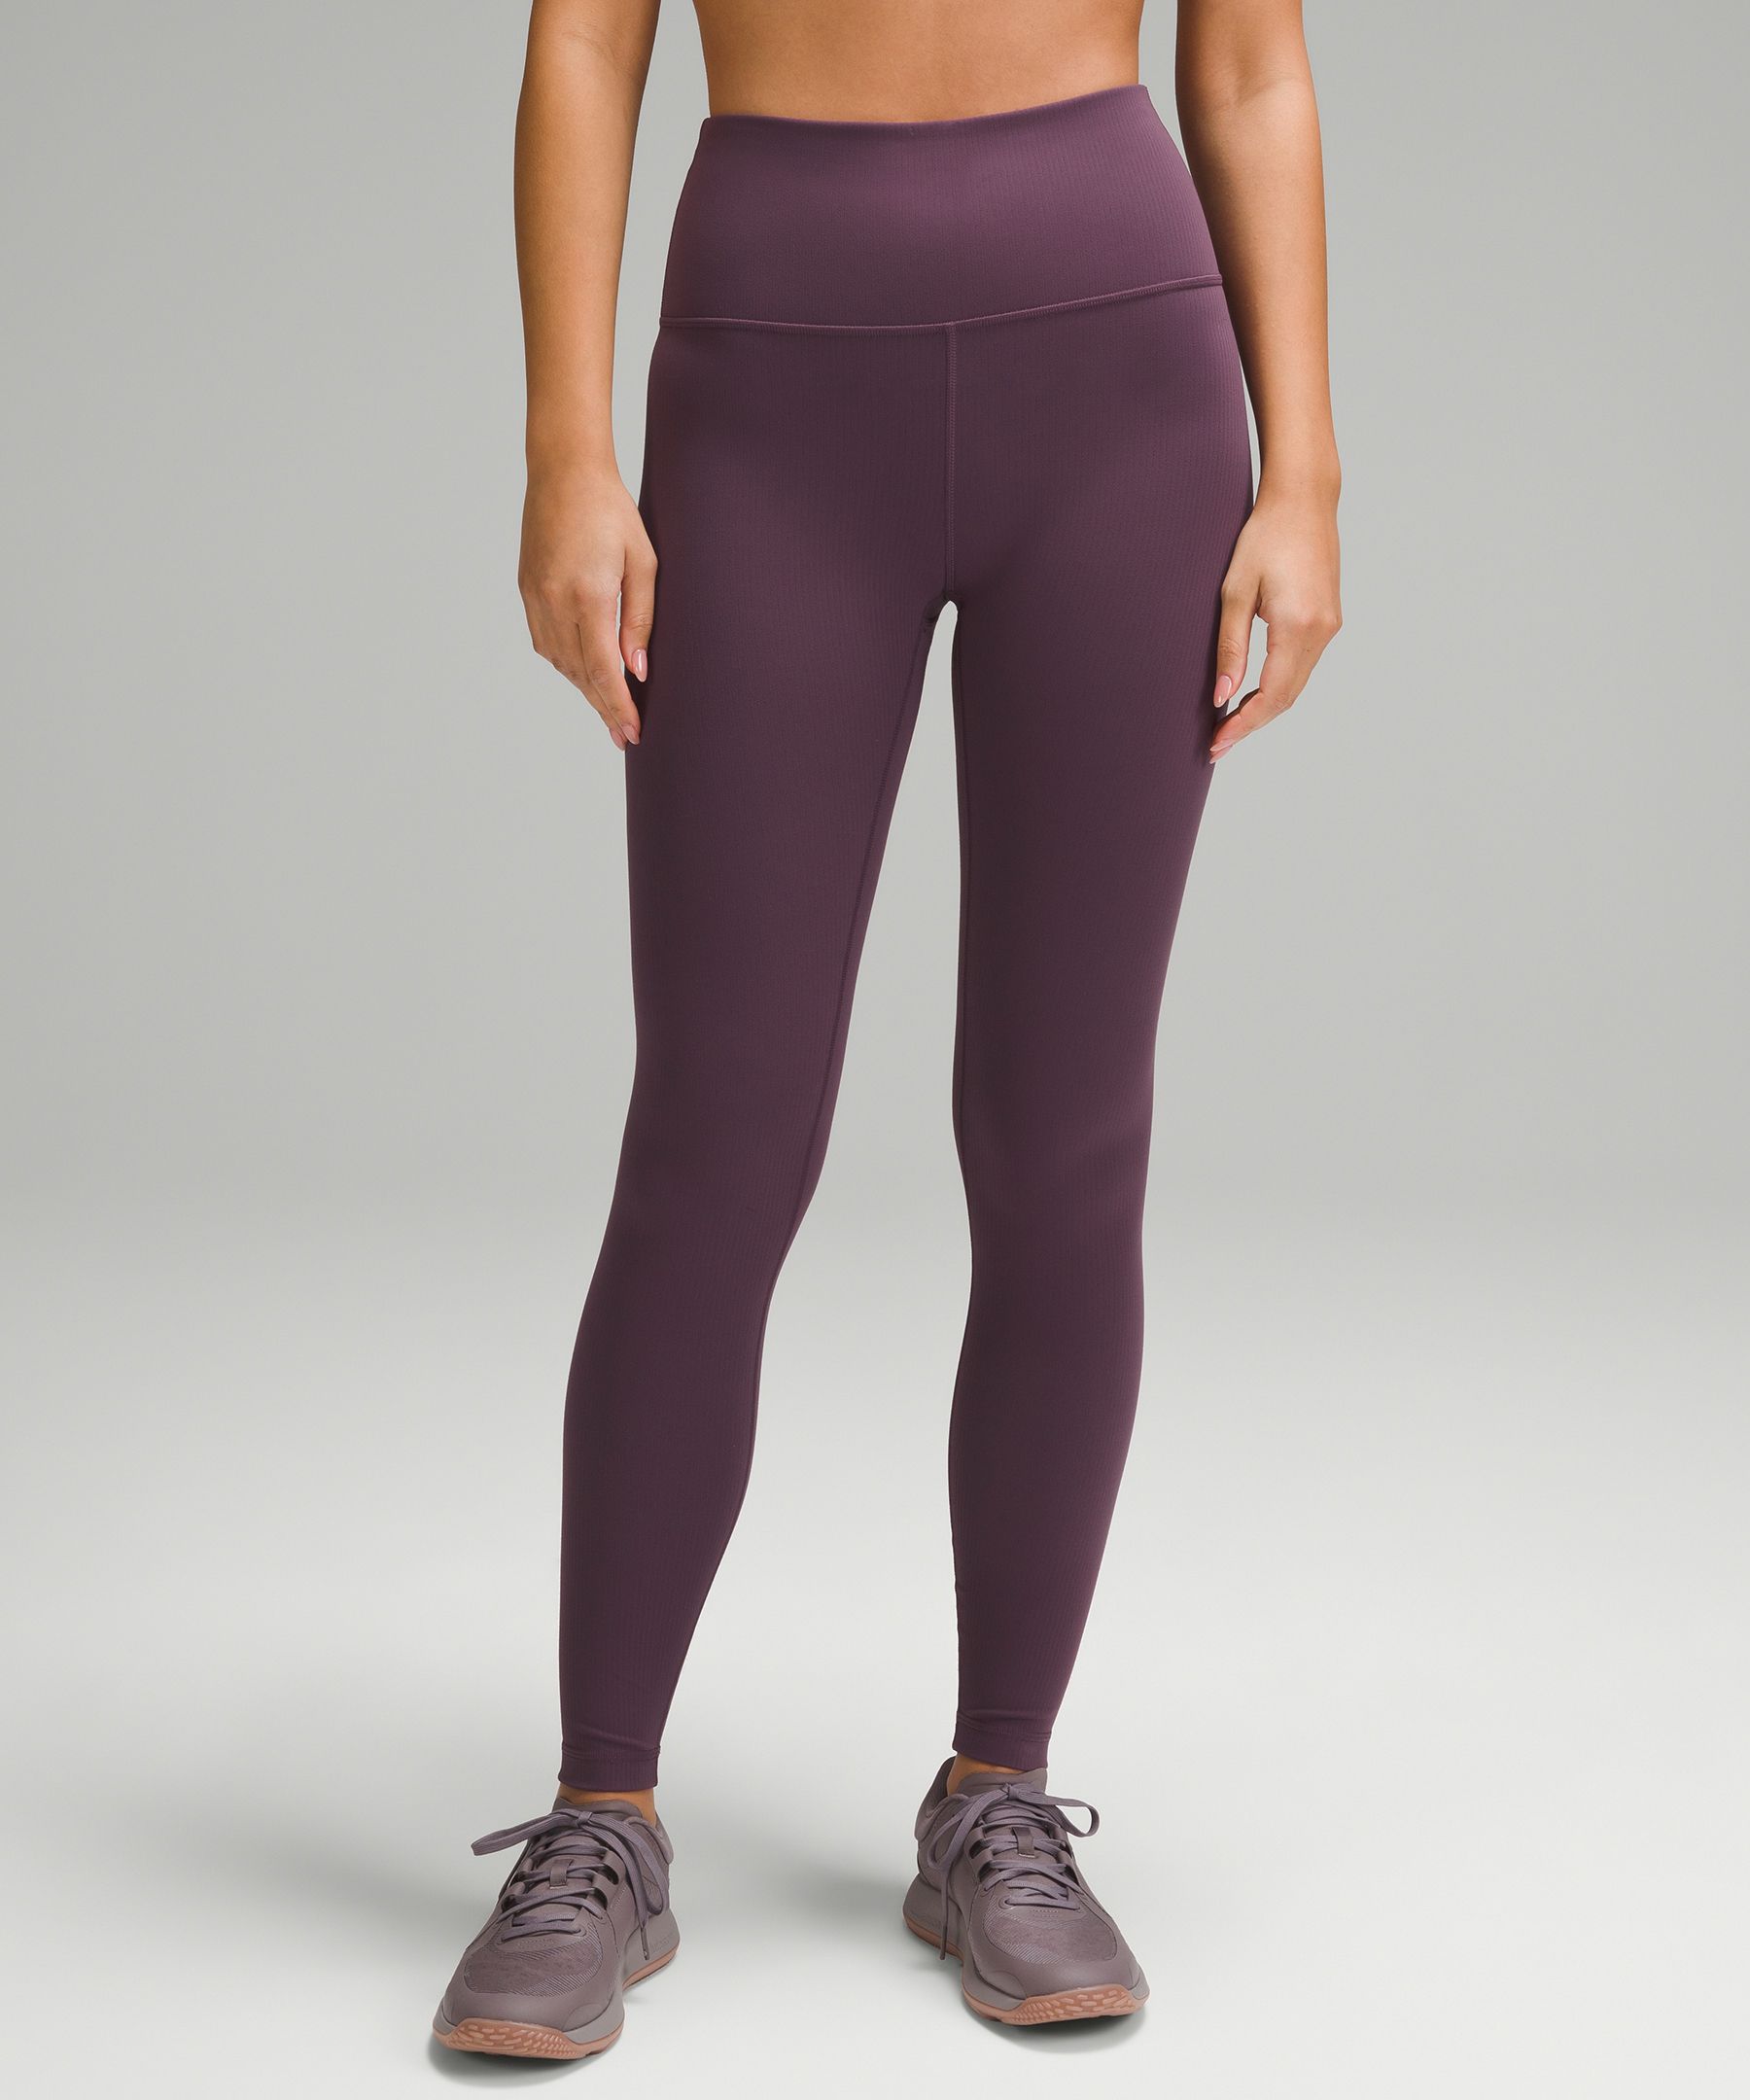 Finding Your Perfect Fit: What Size Lululemon Align Leggings Am I